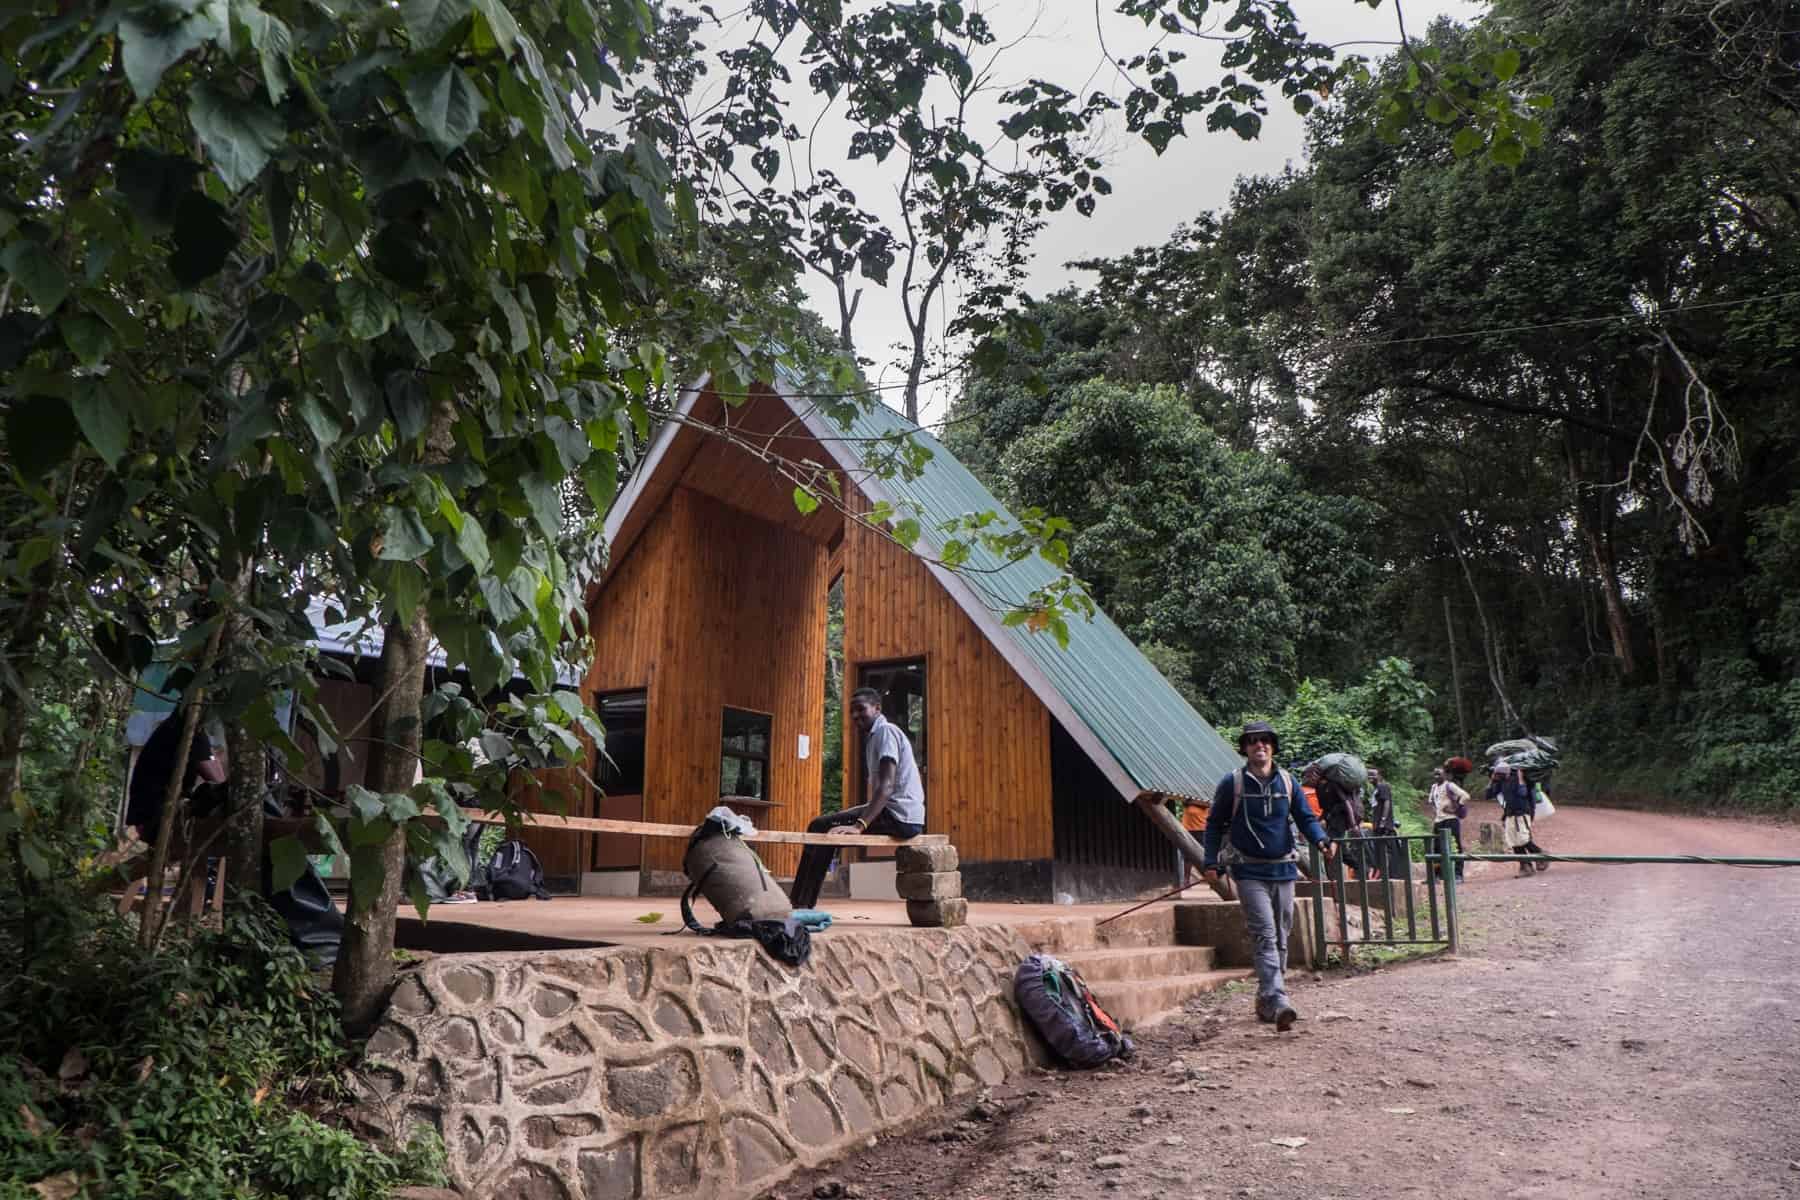 A man sitting on a bench looks towards the camera as another man, in a blue jacket, grey pants and a large hat smiles as he walks out of the wooden triangular building with a green roof - the end of the Kilimanjaro climb with the rainforest behind